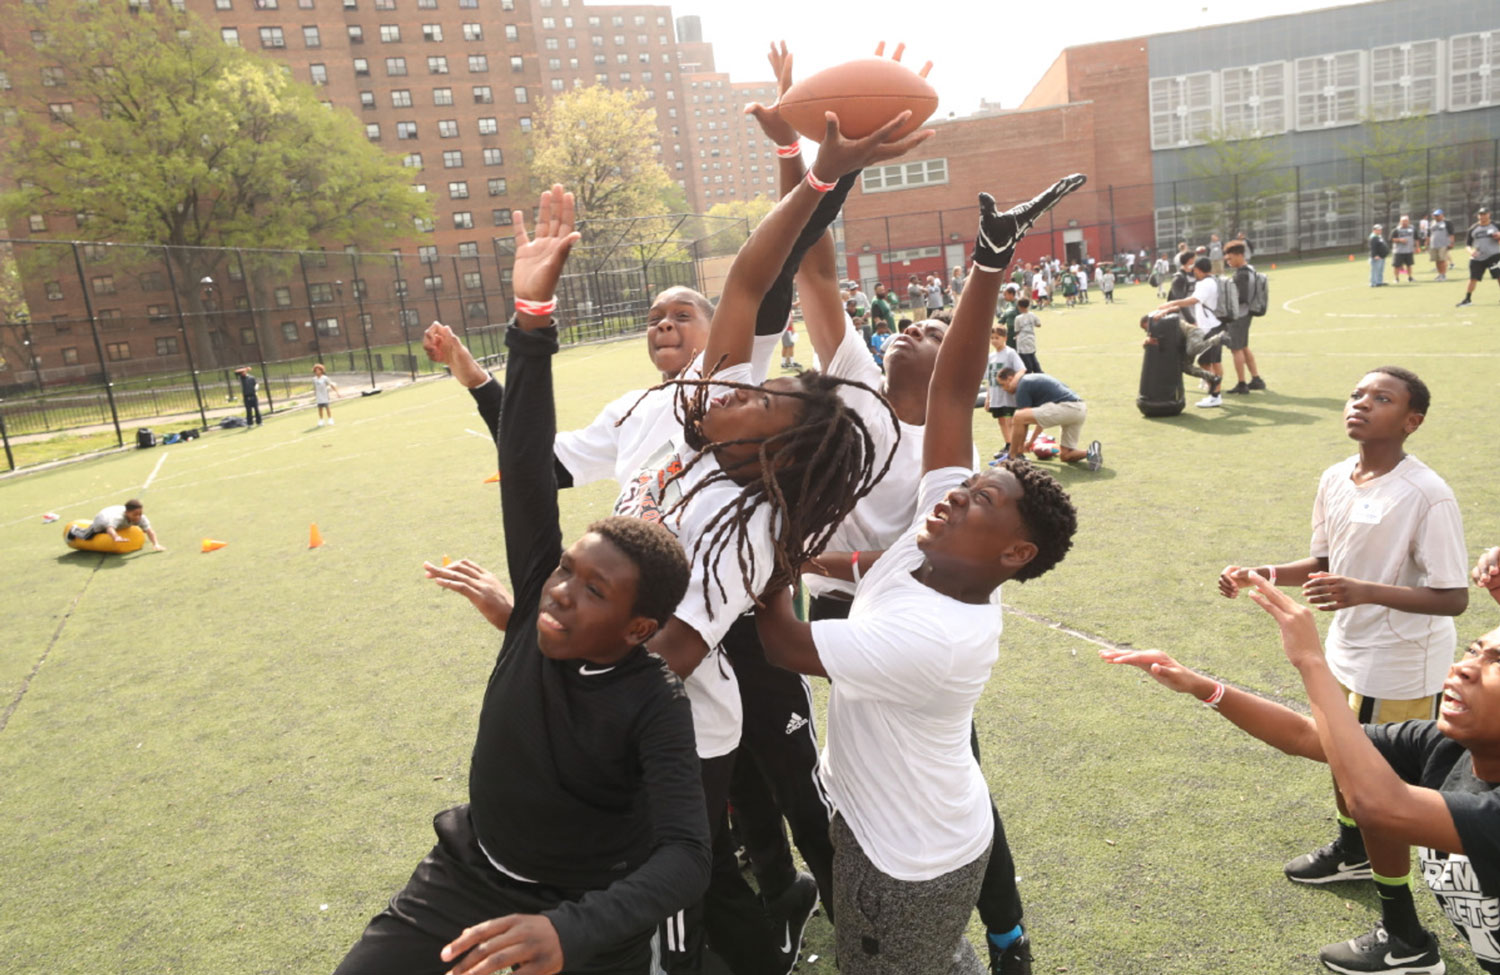 A group of participants leap up to catch a football.